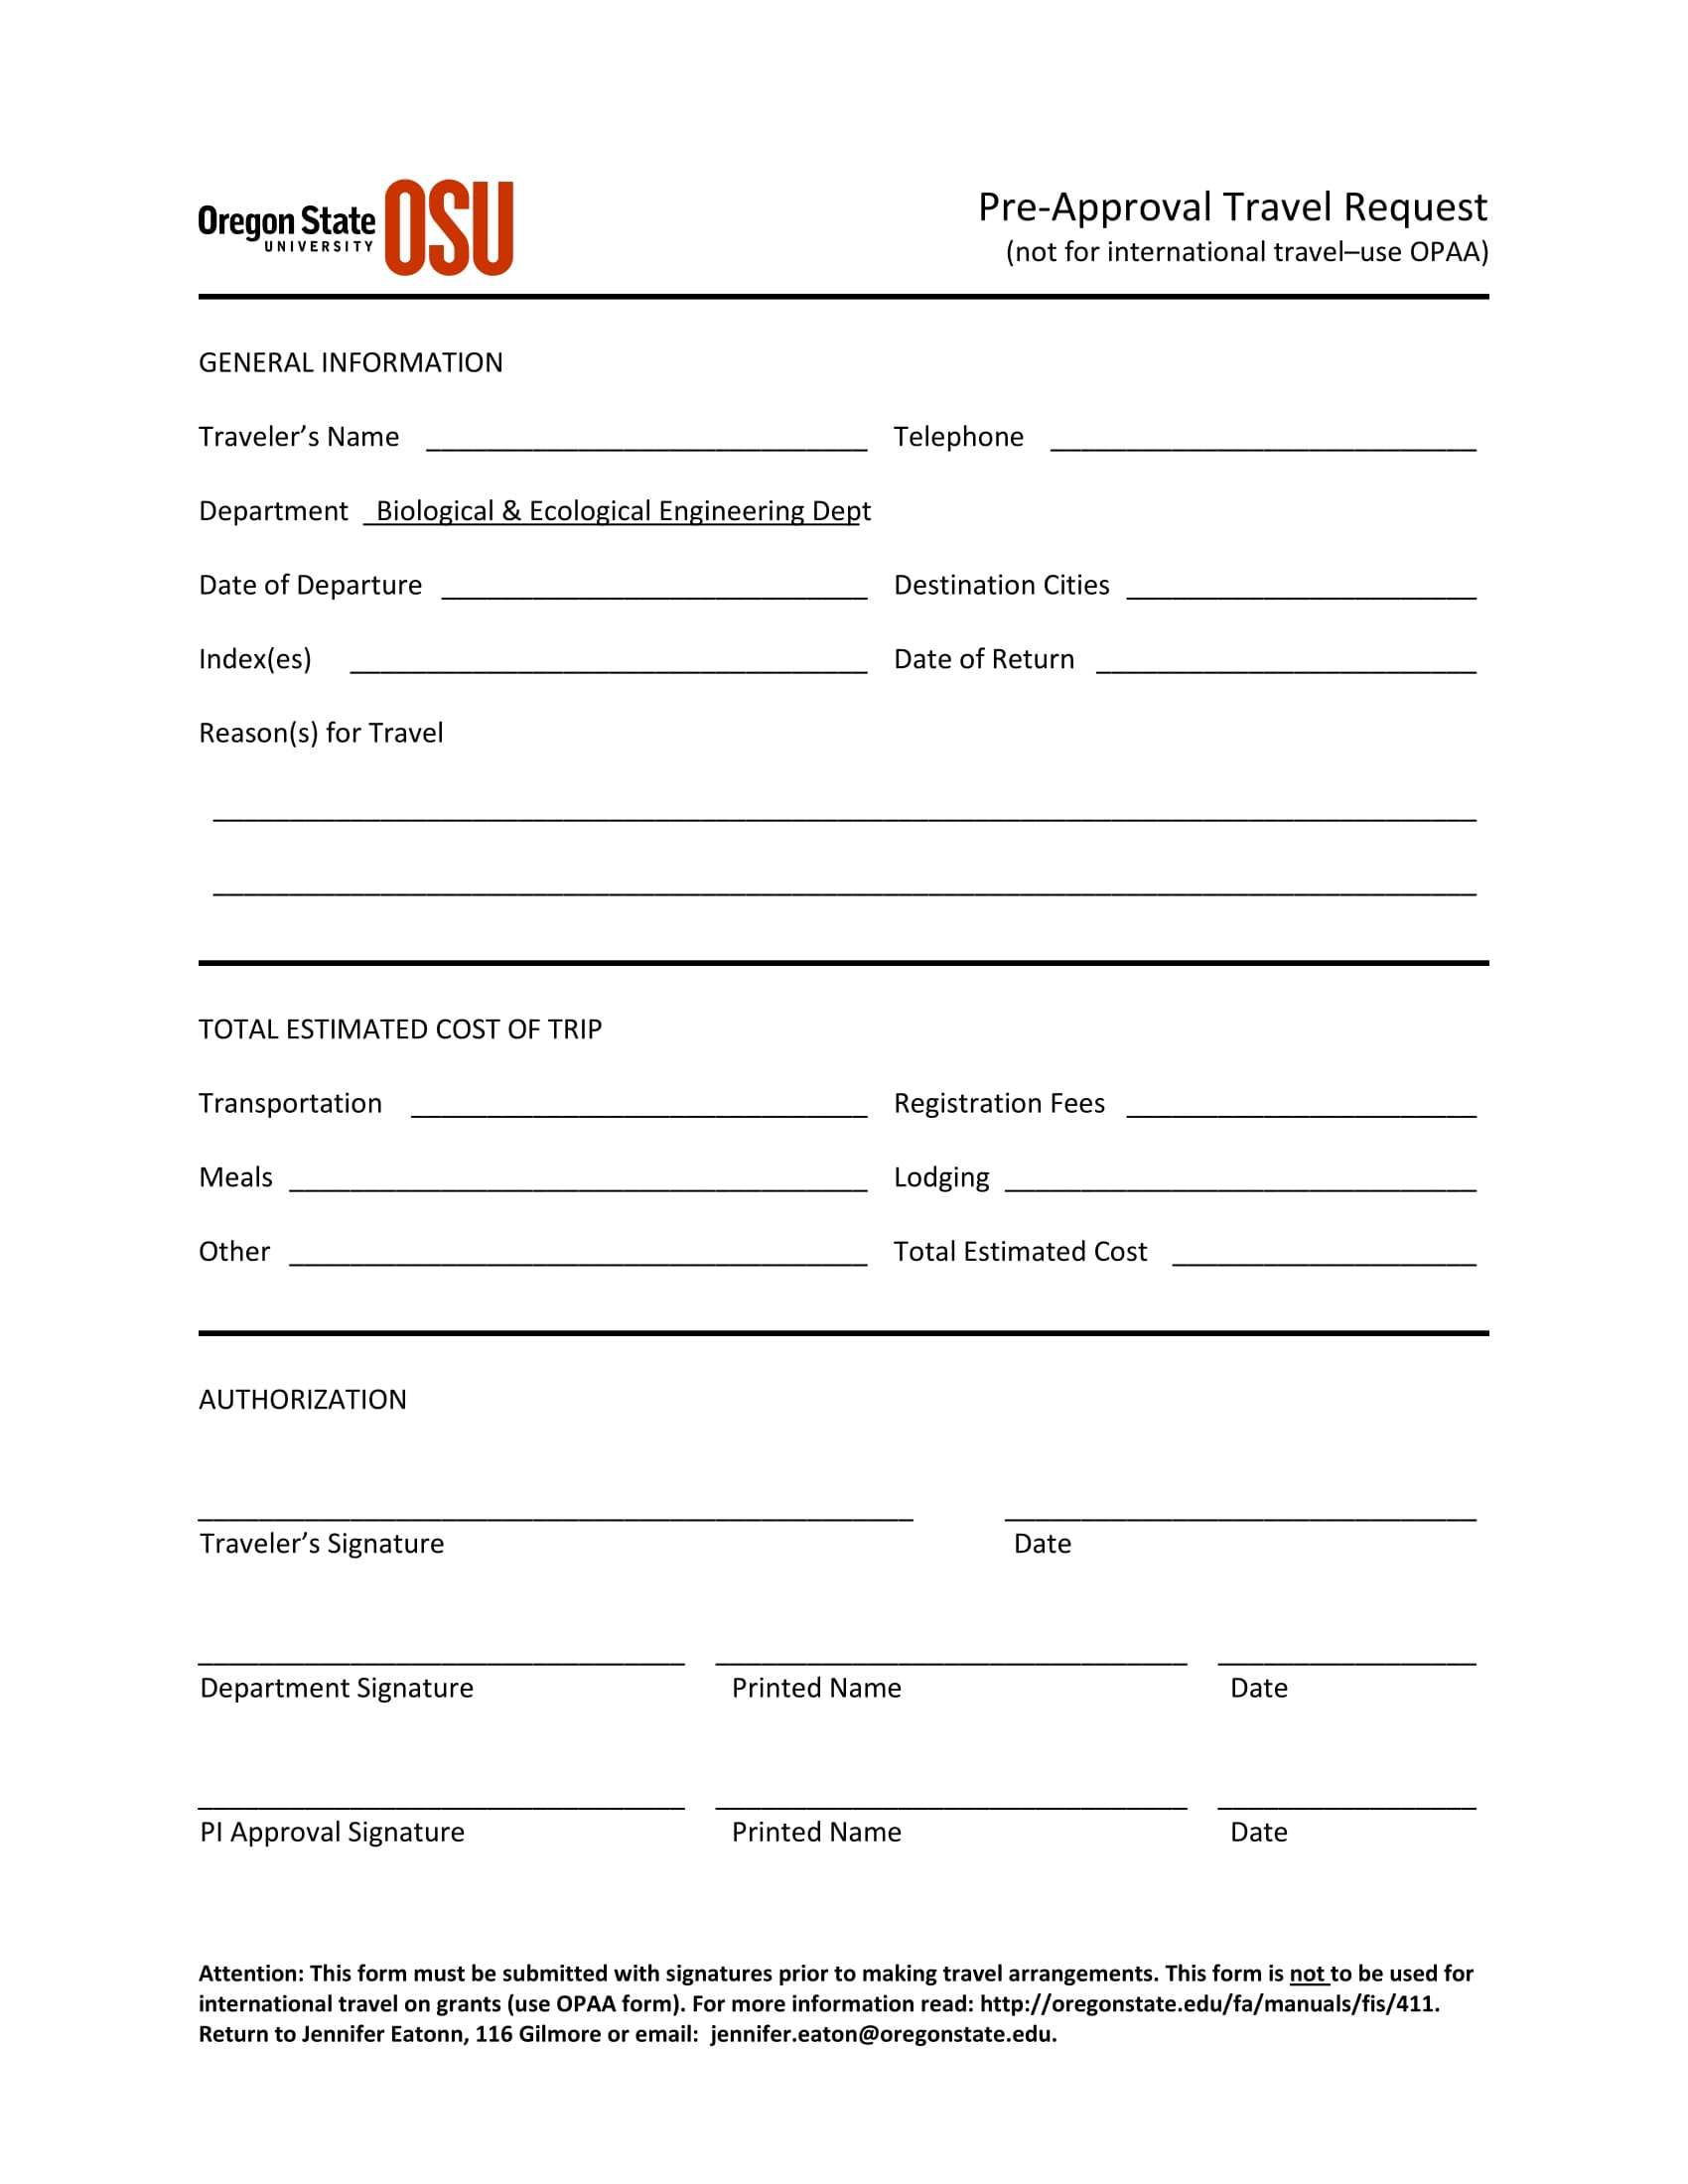 pre approval travel request form 1